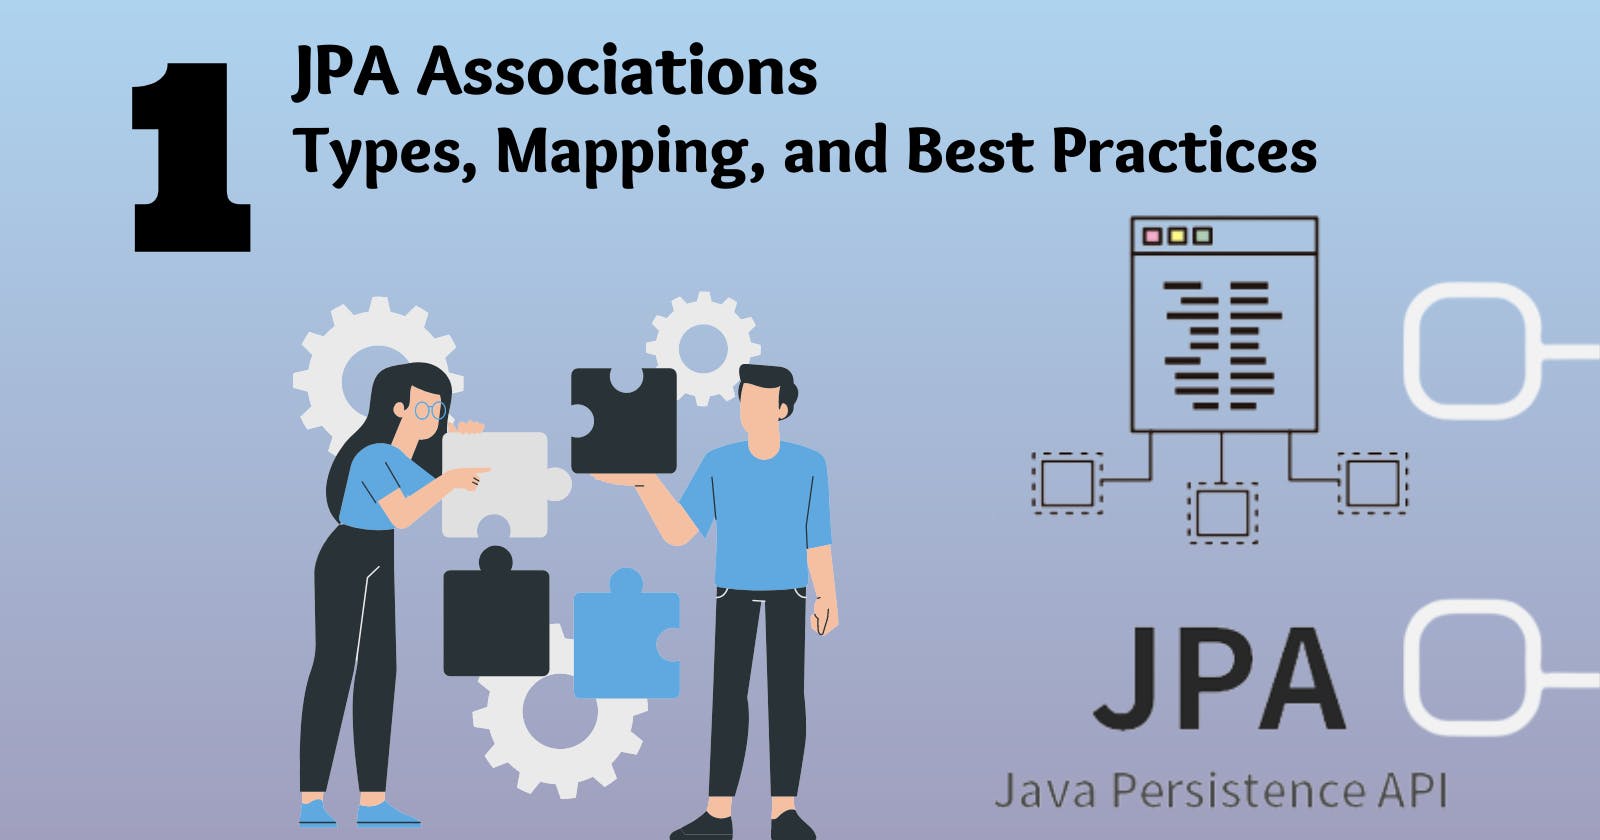 JPA Associations: Types, Mapping, and Best Practices